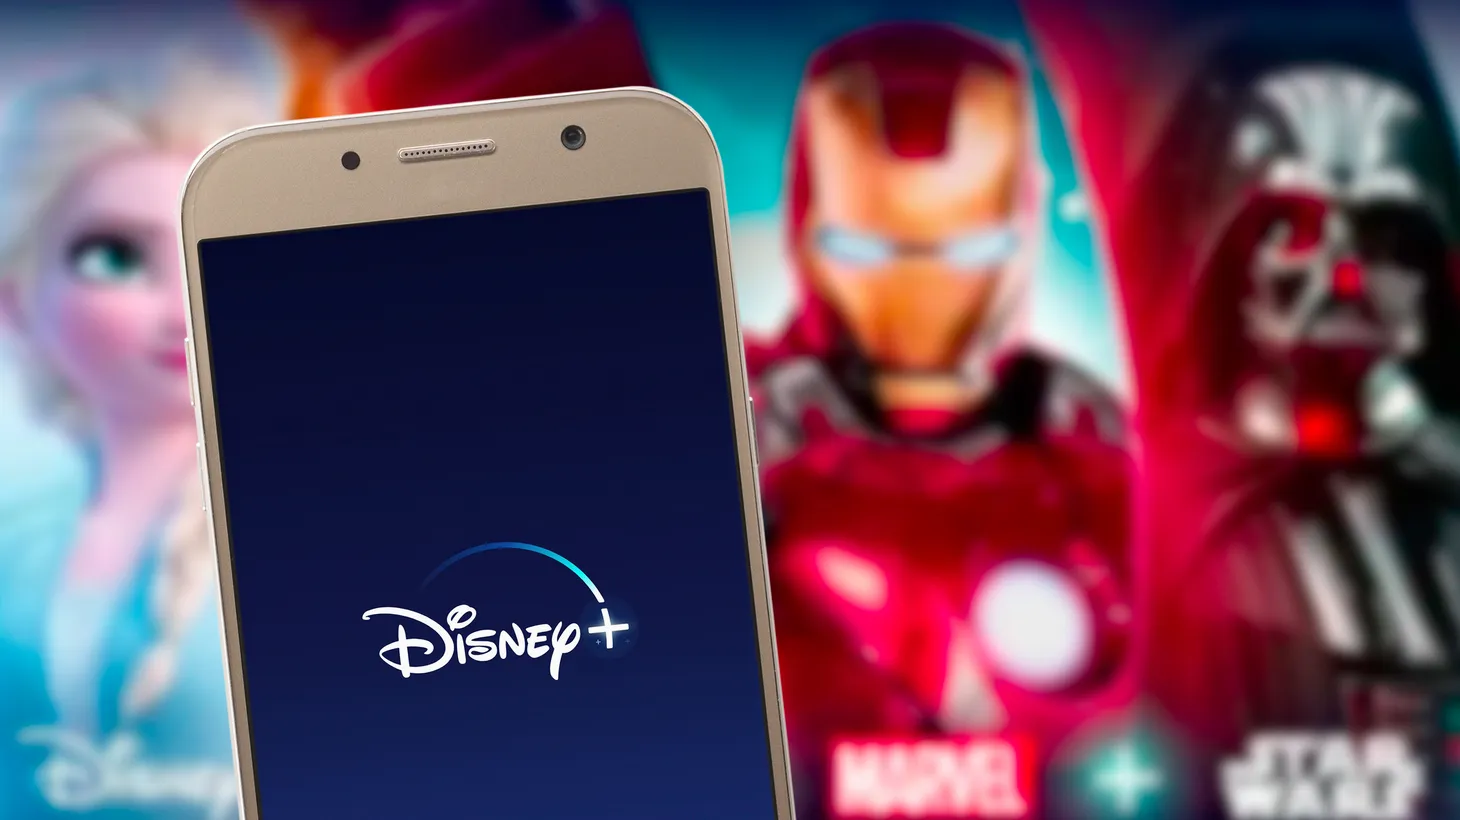 A Marvel poster appears behind a Disney+ app logo on a smartphone screen. Photo by Miguel Lagoa/Shutterstock.